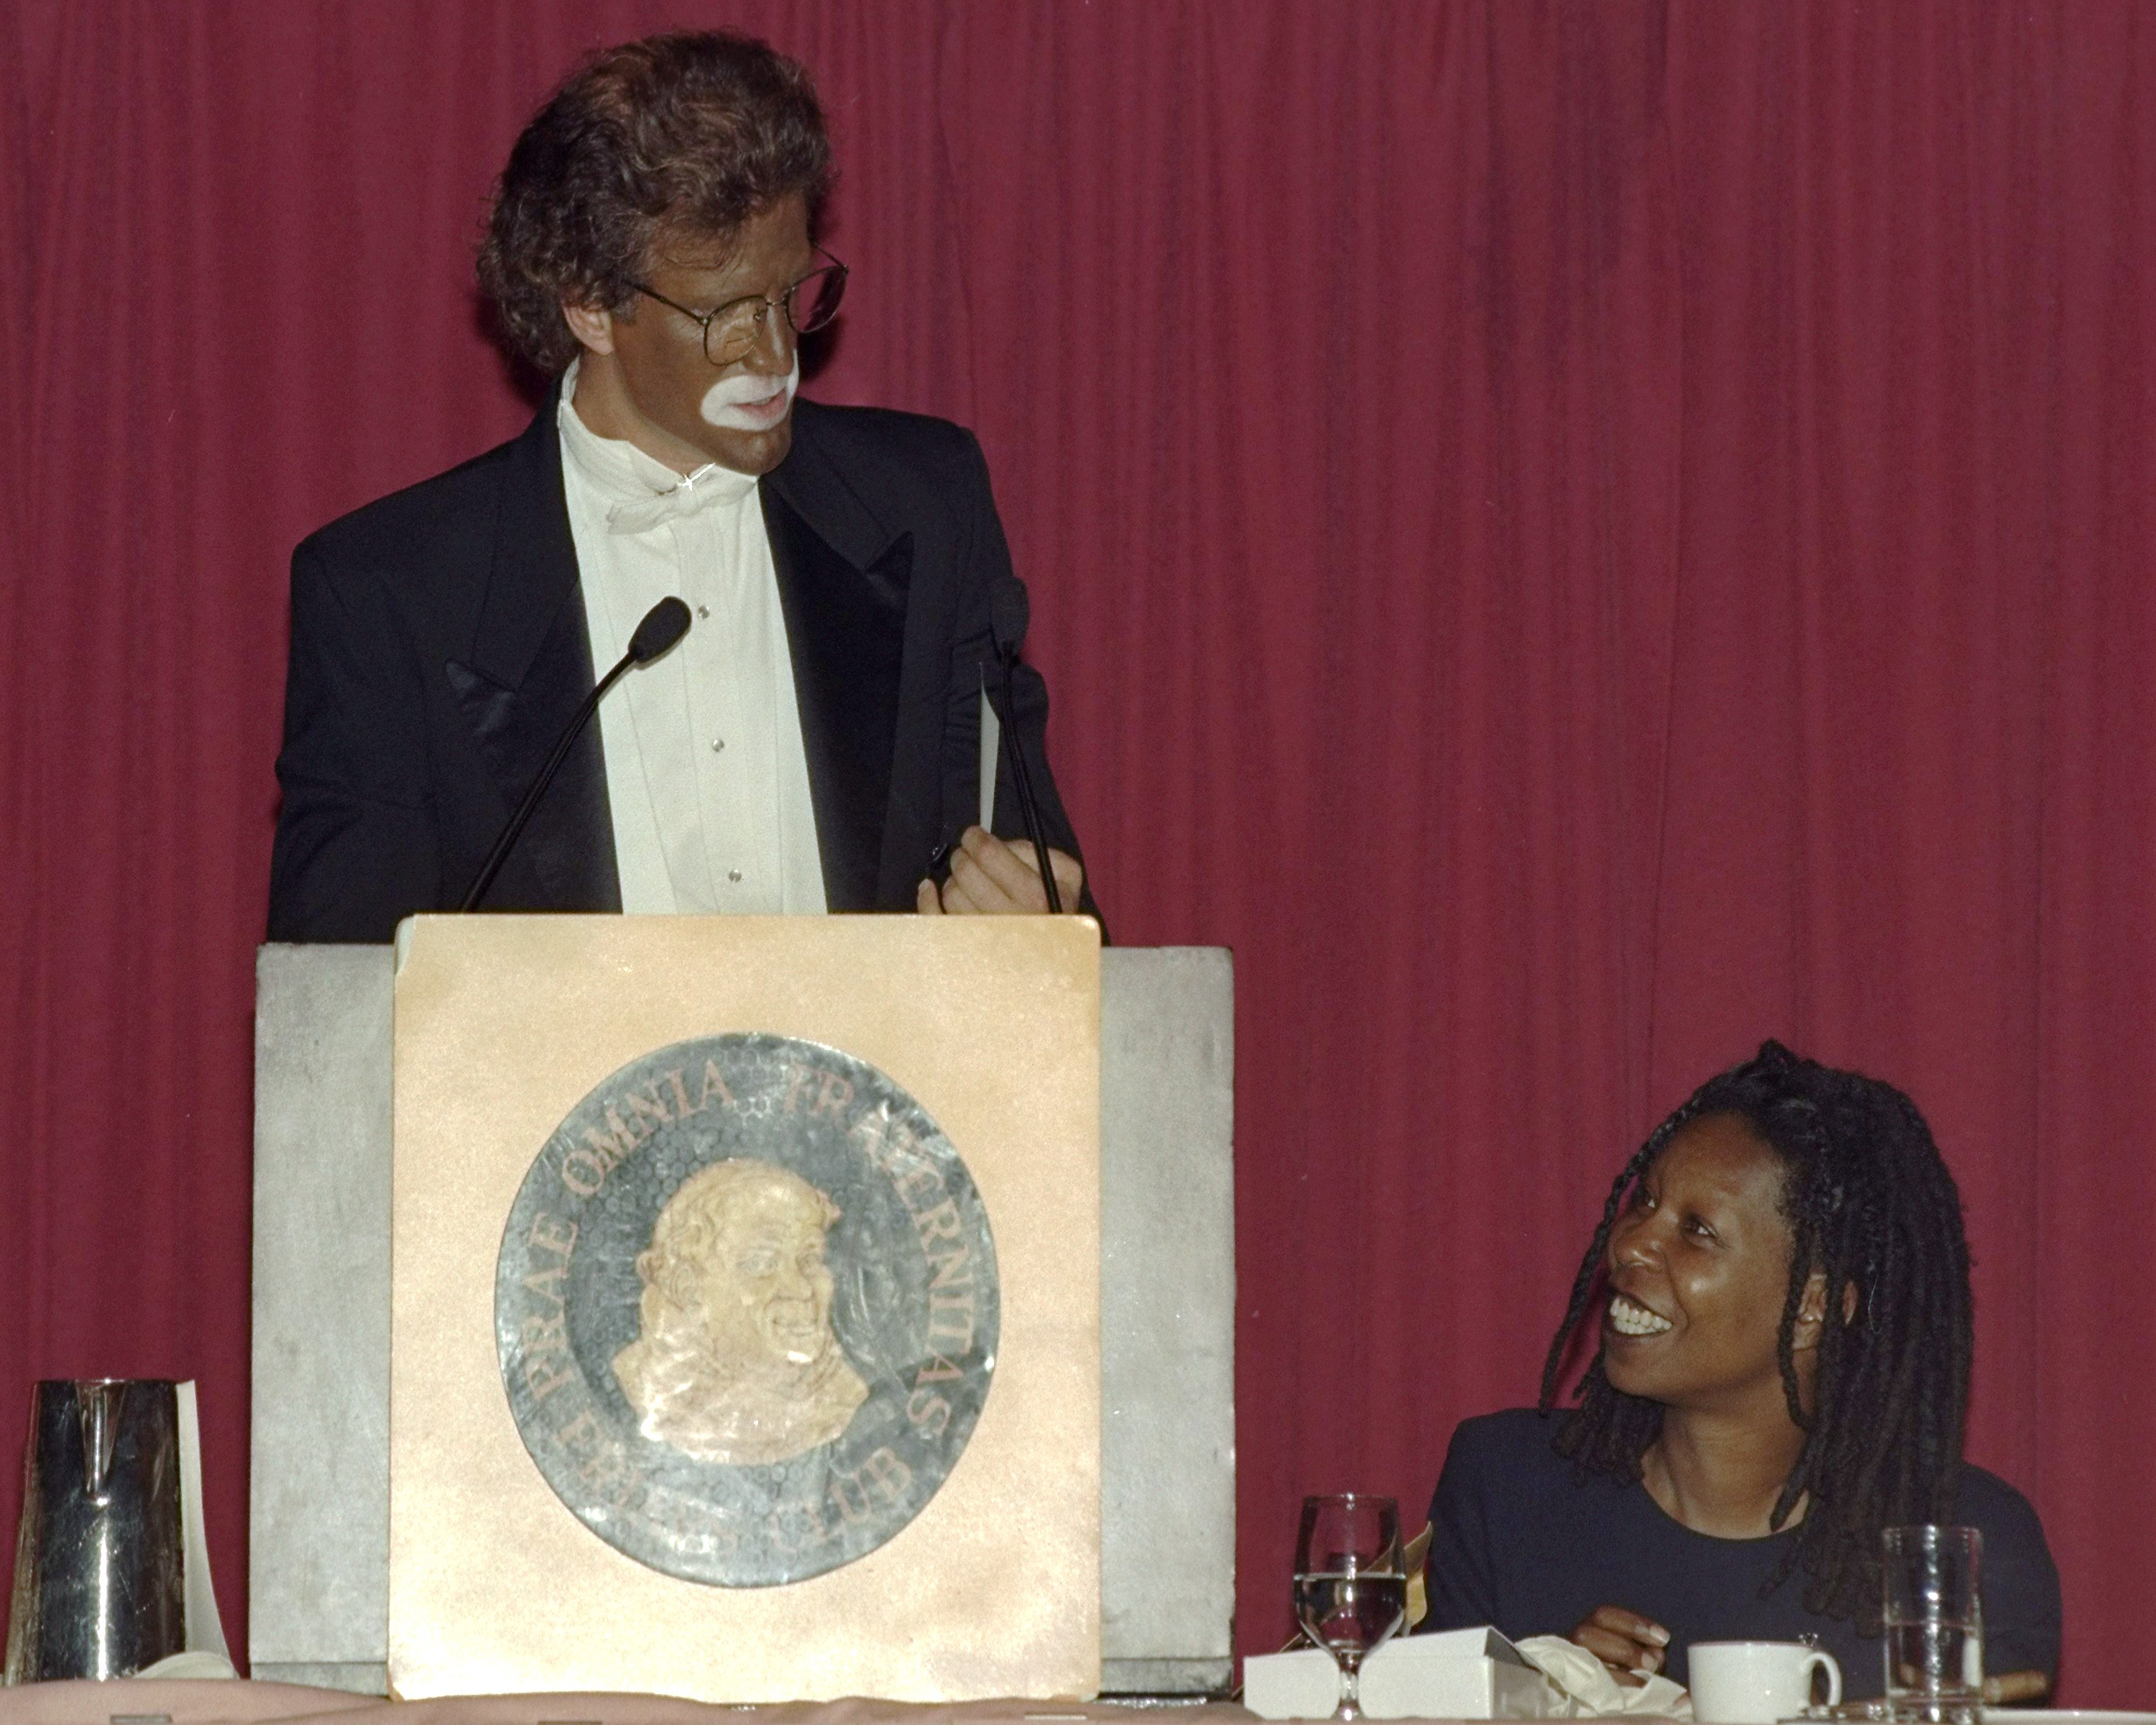 Ted Danson appears in black face during New York Friars Club Roast of Whoopi Goldberg in 1993 | Source: Getty Images